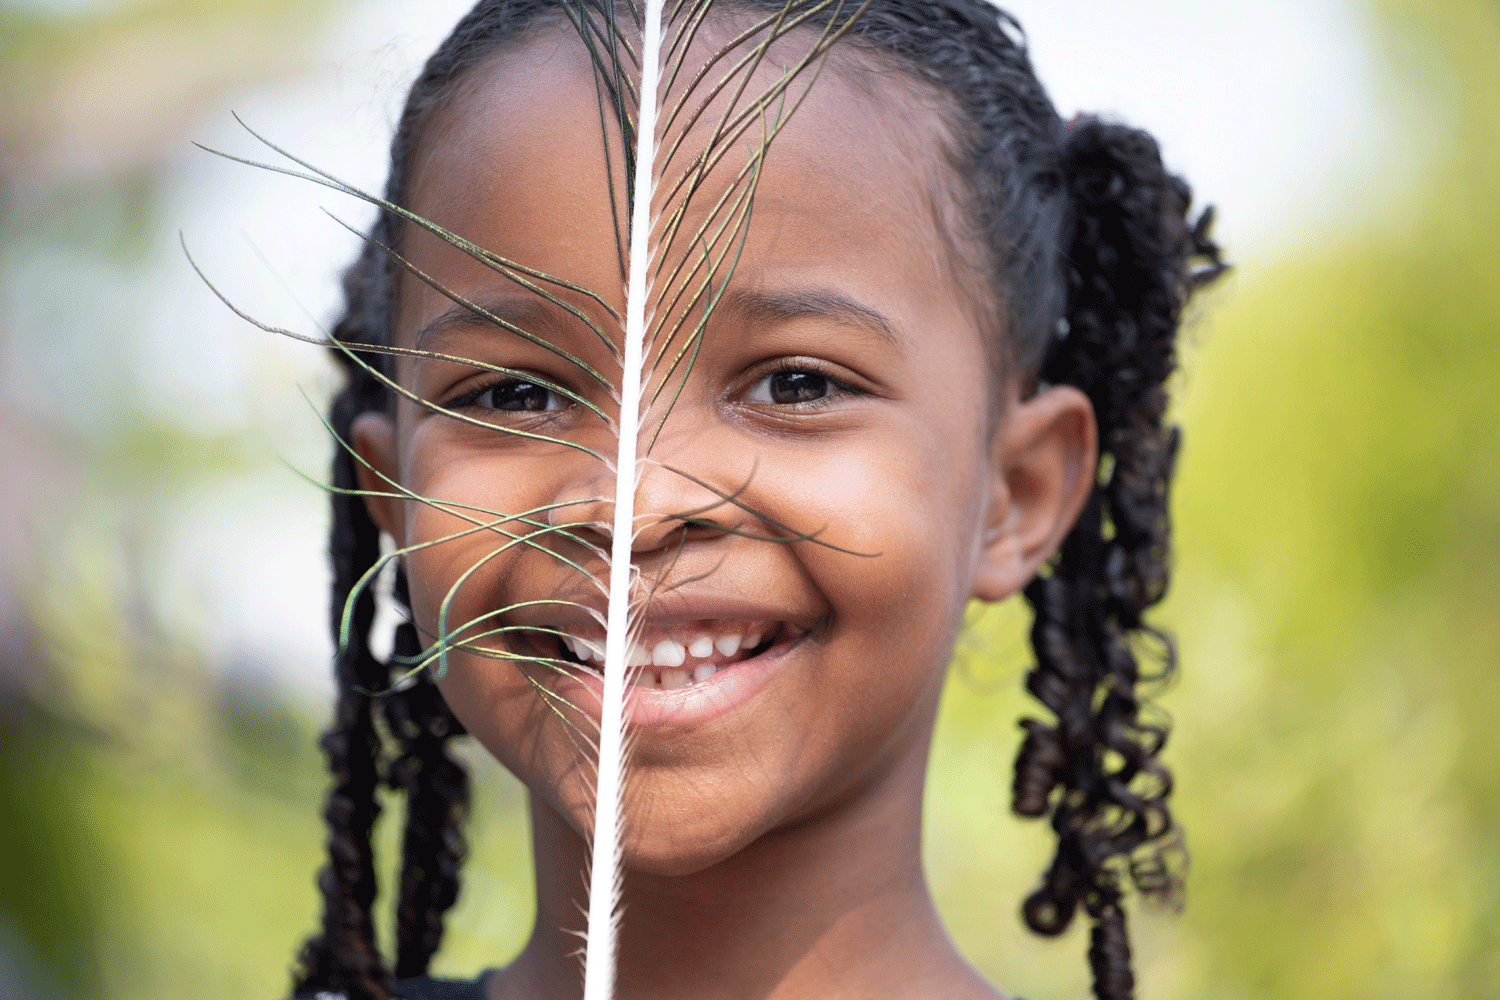 A smiling young girl holds a blue and green peacock feather in front of her face.